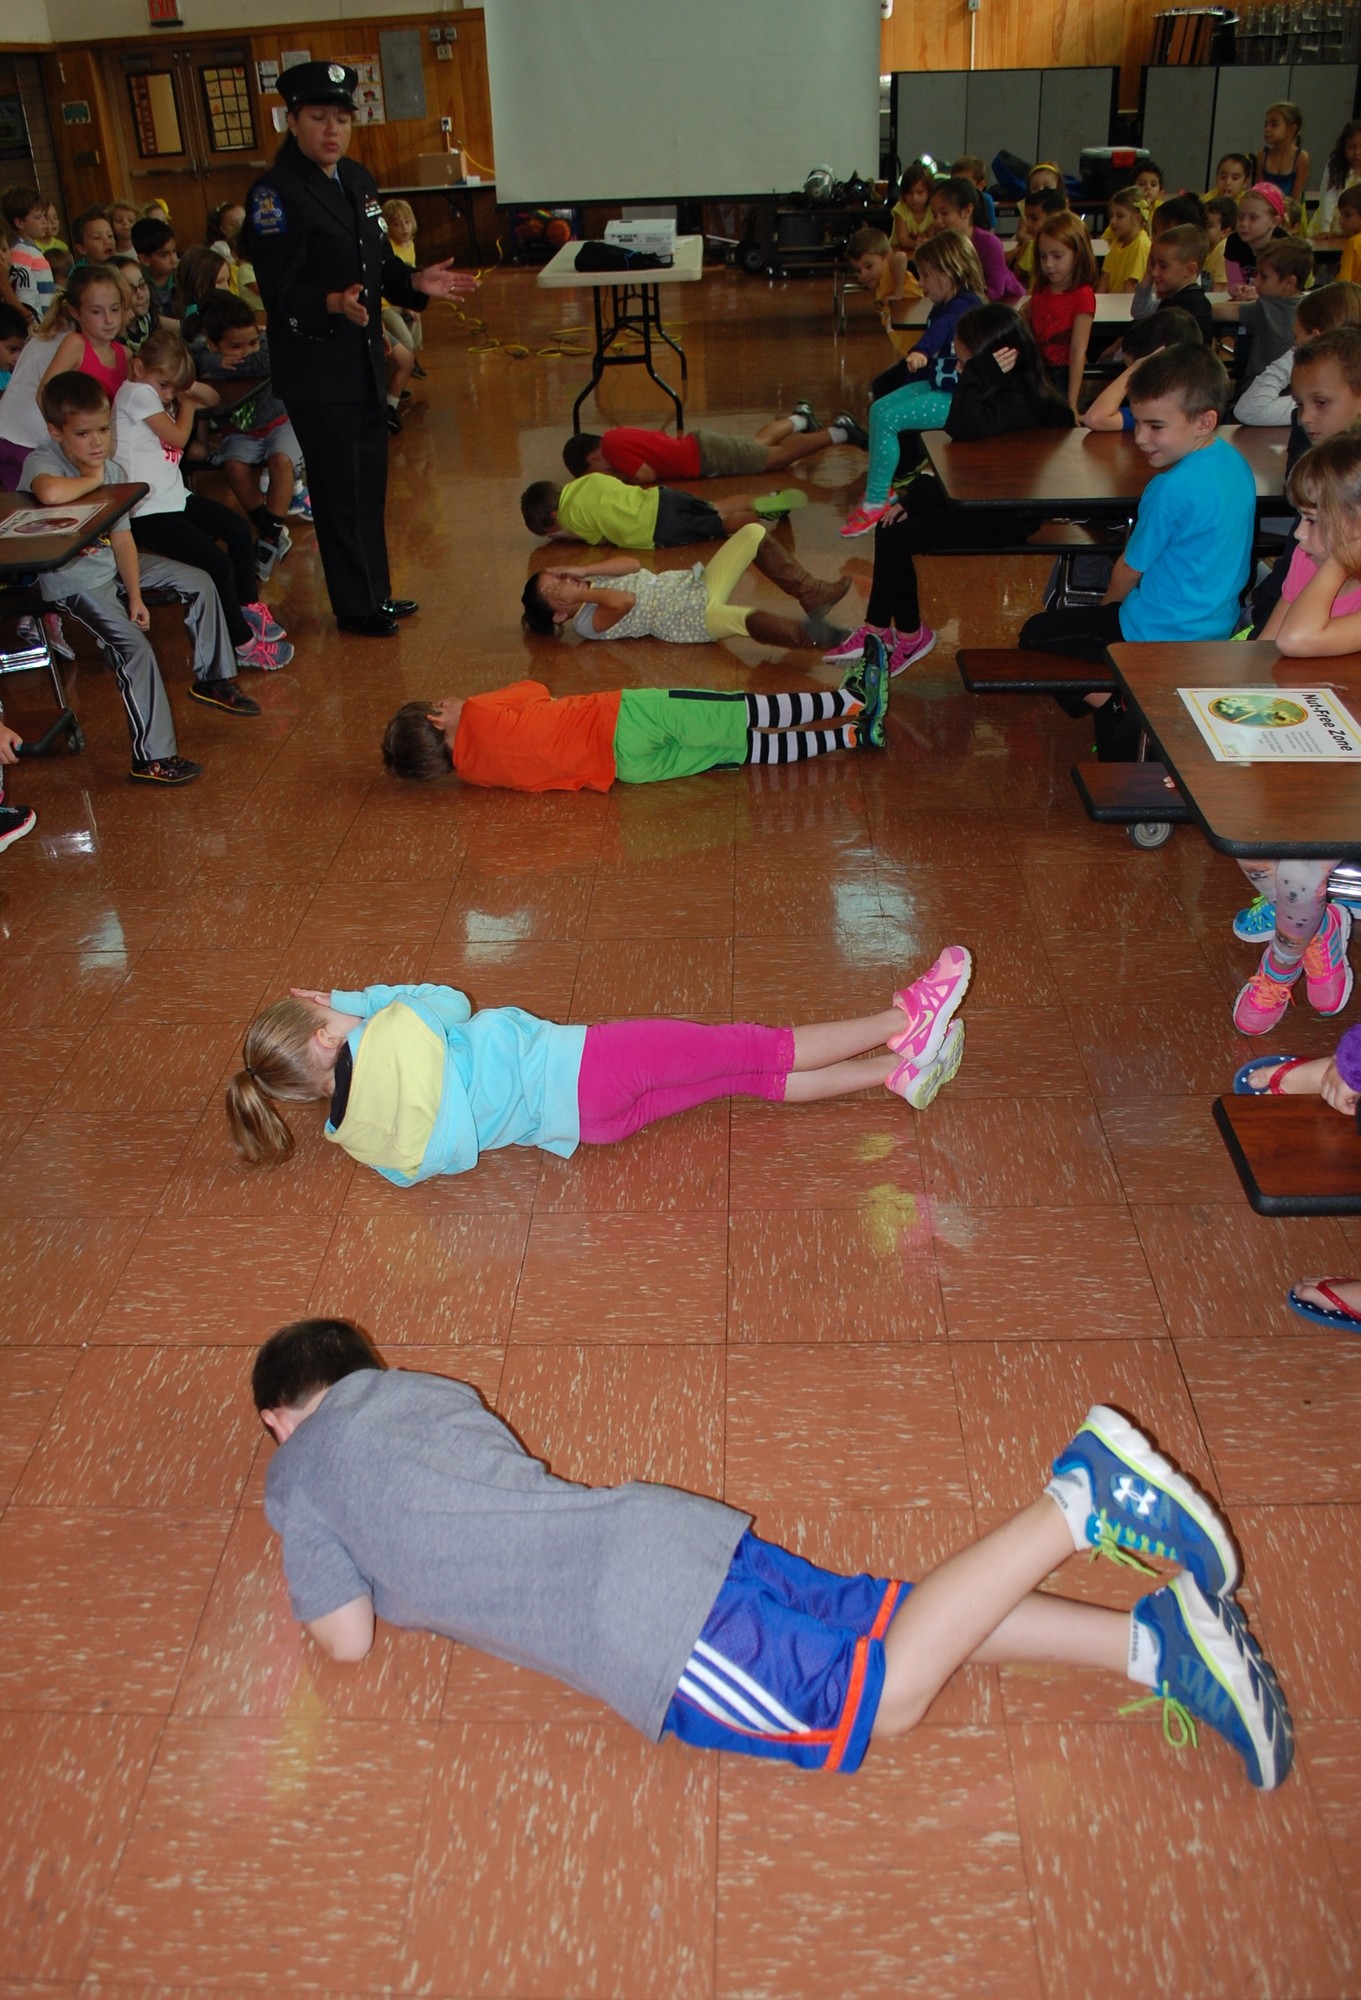 Firefighter Marcela Loeber taught children how to stop, drop and roll.